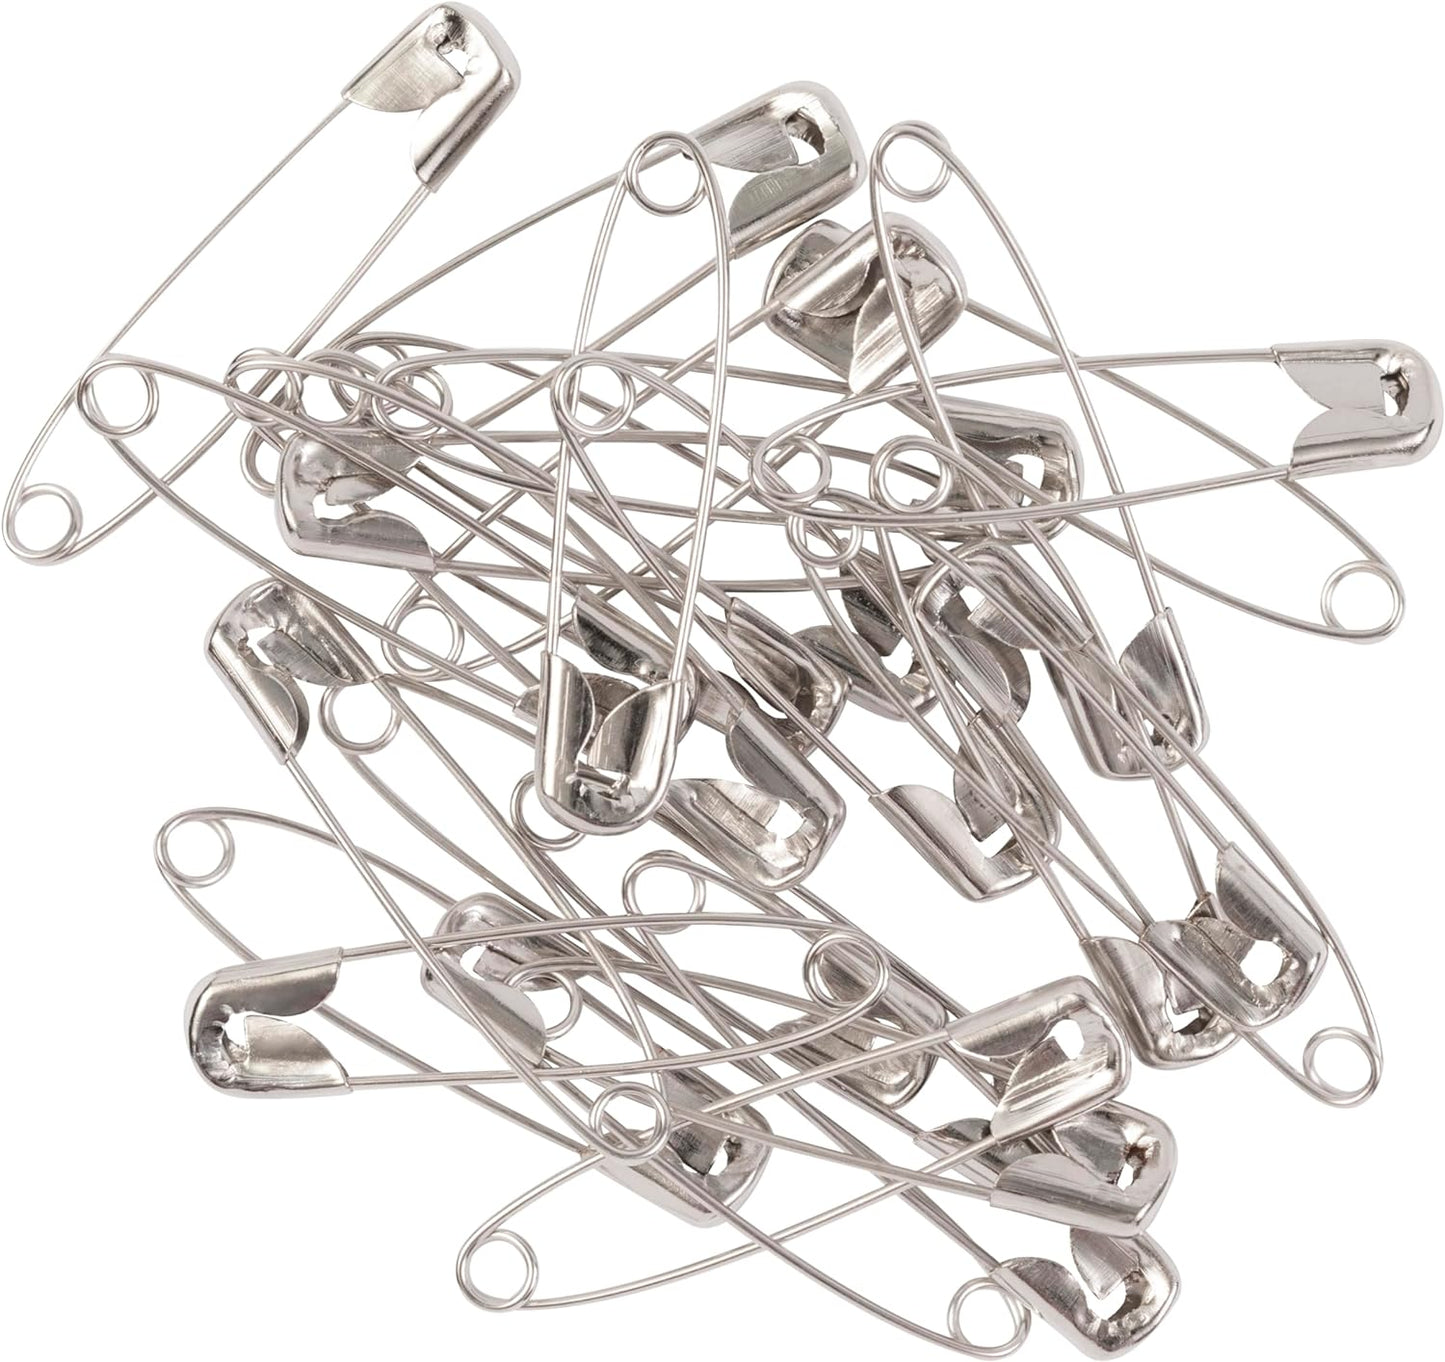 Assorted Safety Pins - Assorted 3-Size Safety Pin Set - Sewing Accessories and Supplies - 75-Piece